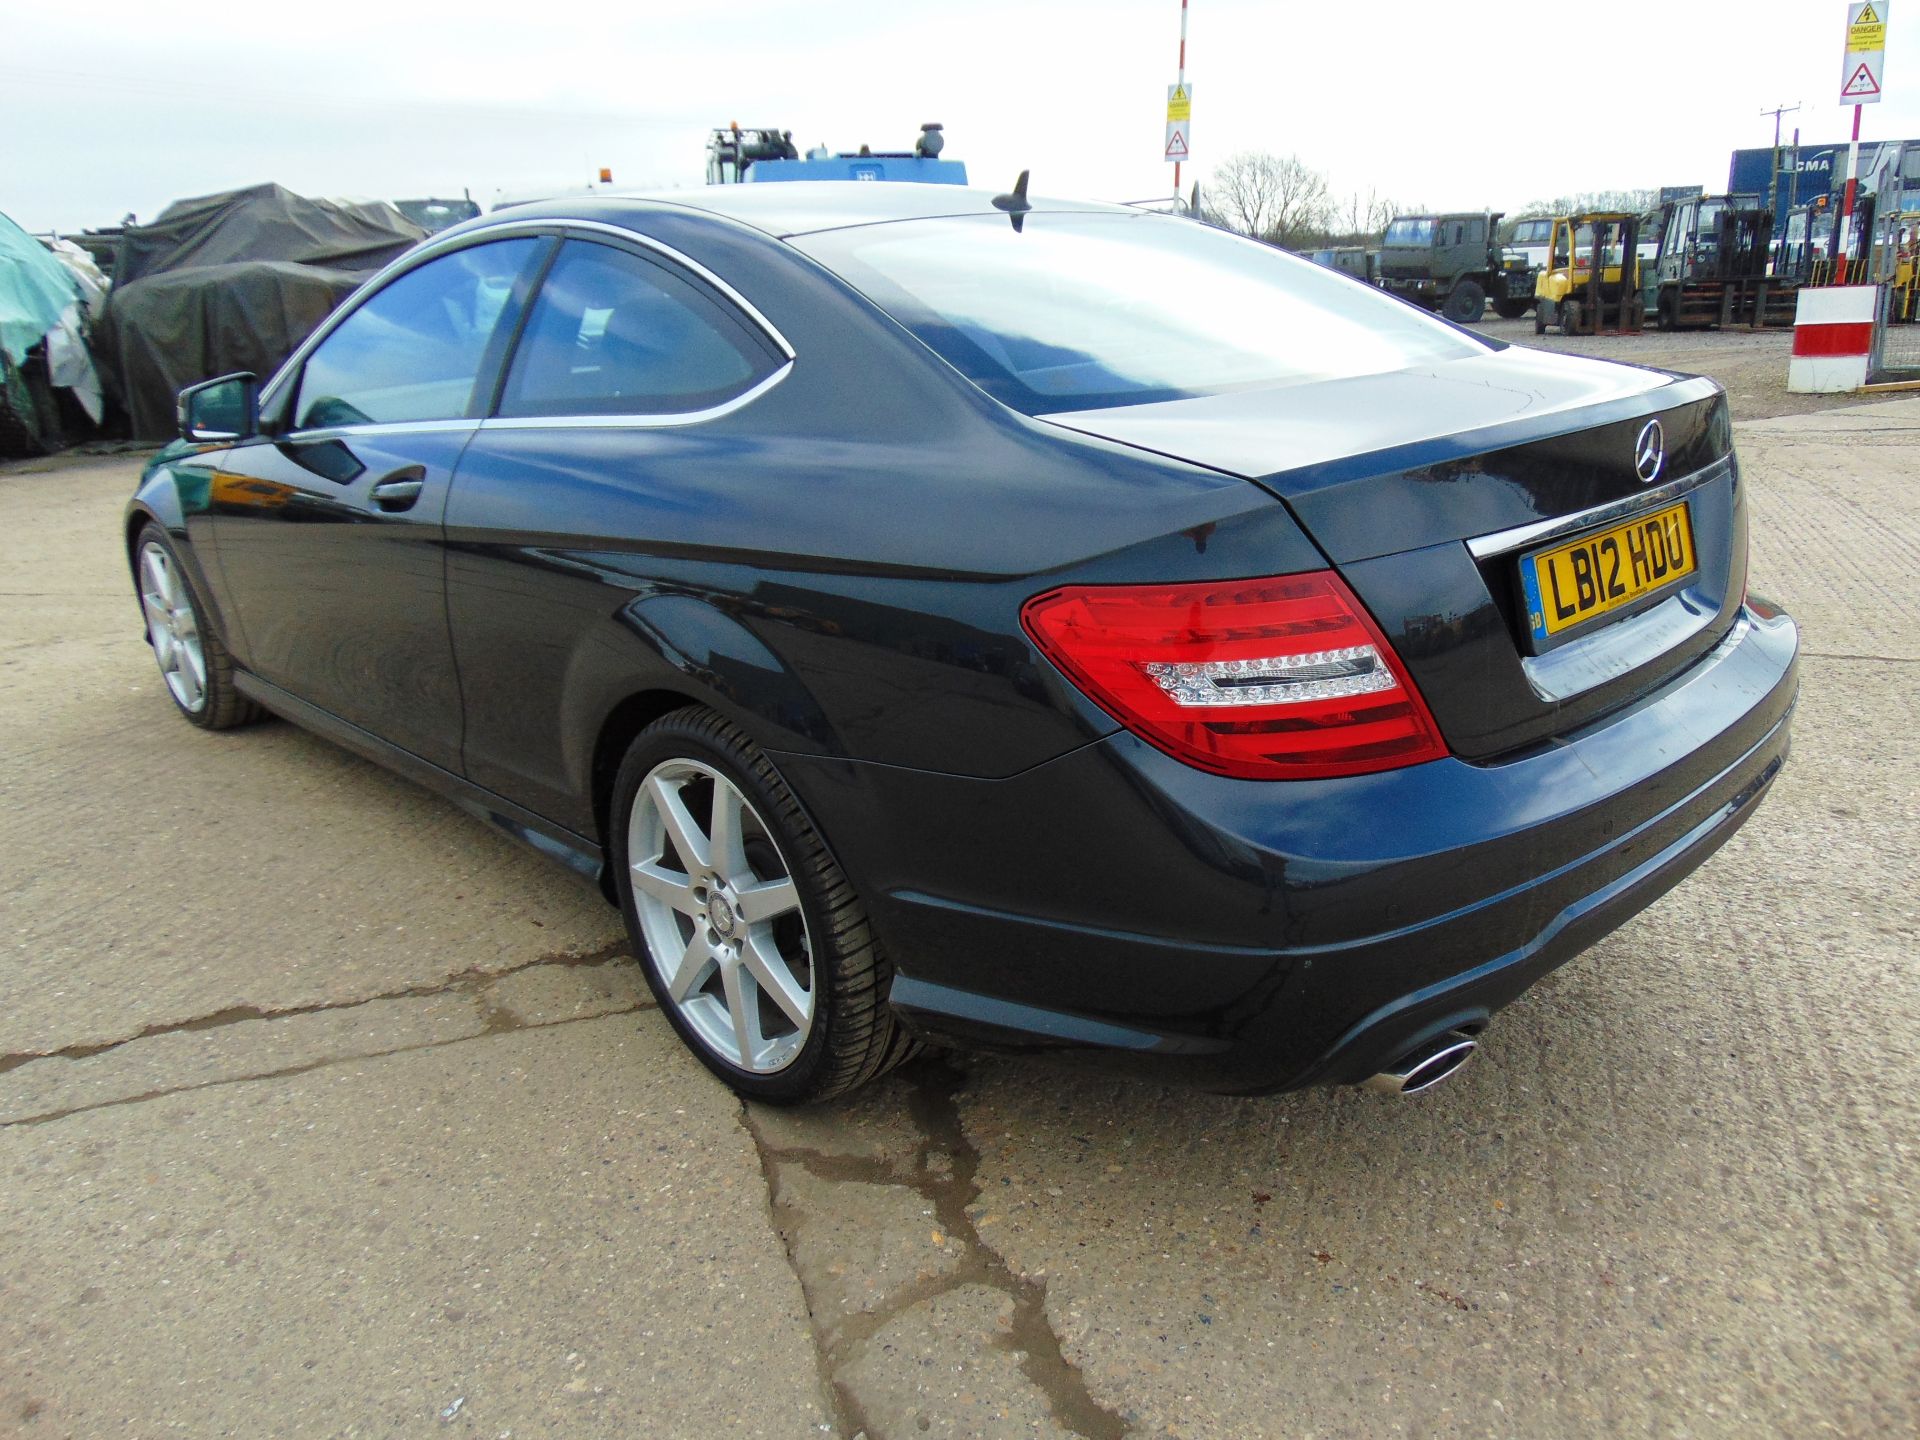 2012 Mercedes-Benz C Class 2.1 C250 CDI BlueEFFICIENCY AMG Sport 4dr Auto ONLY 7,860 miles!!! - Image 8 of 29